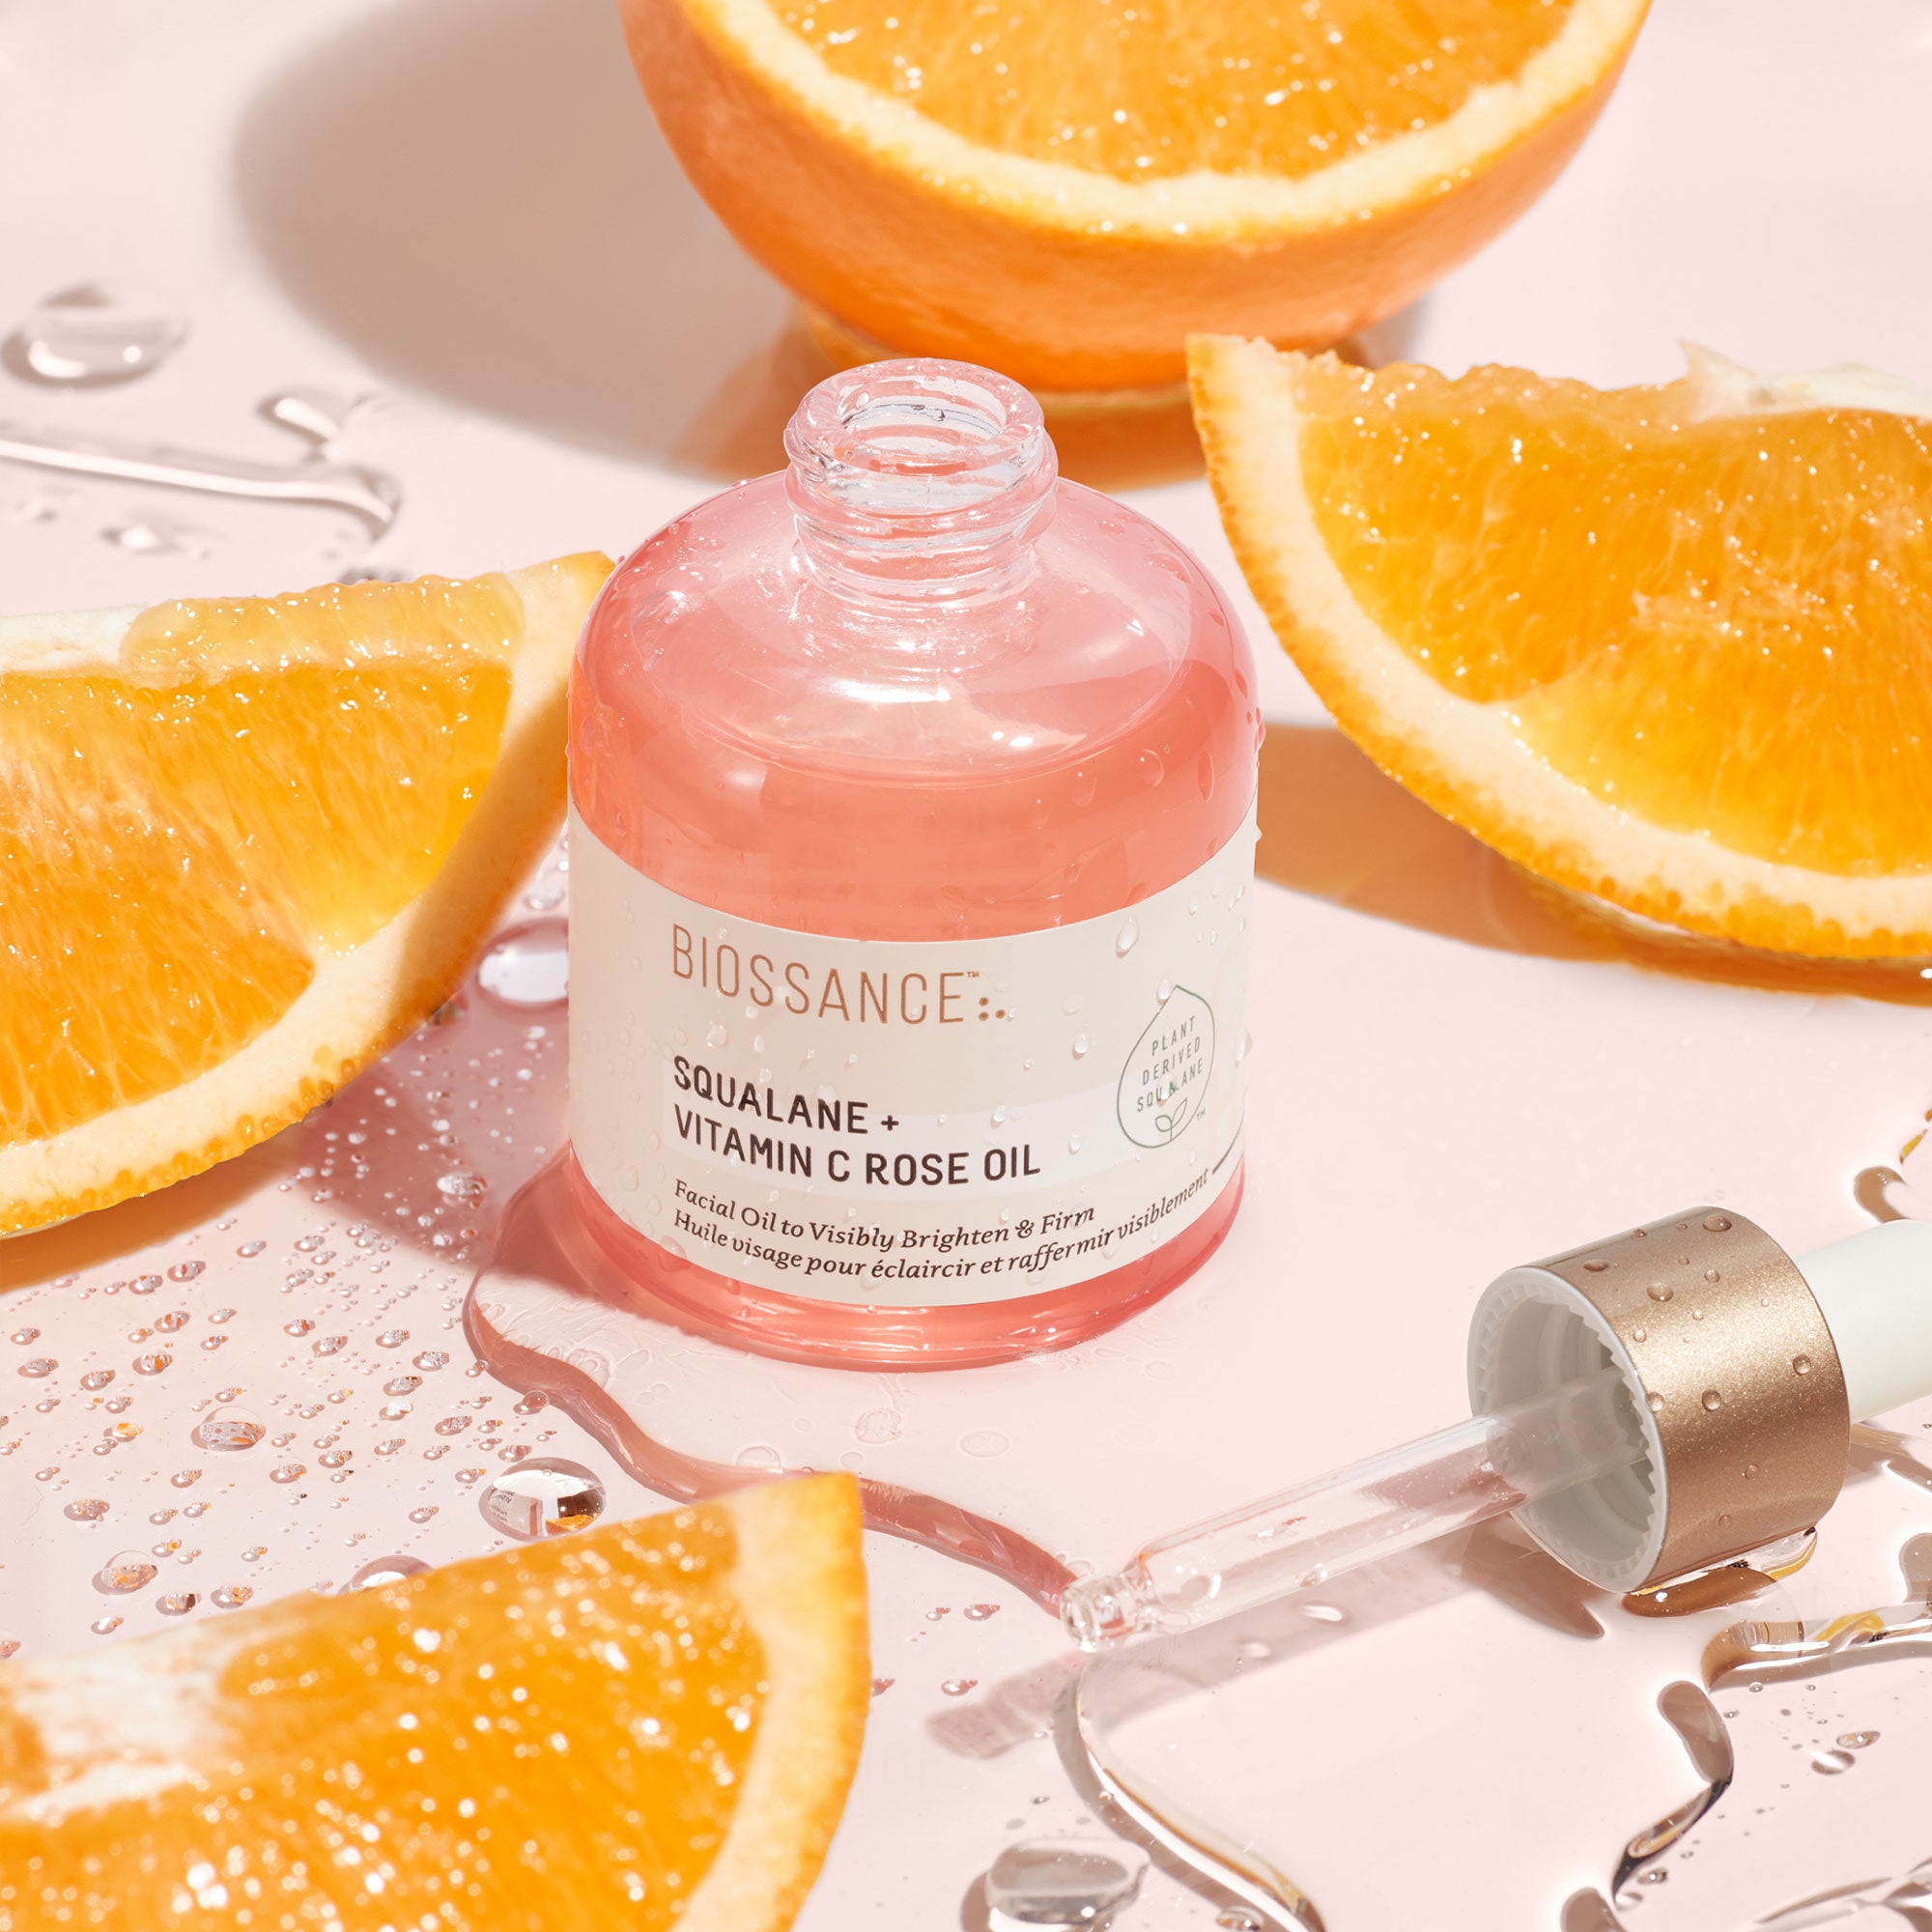 Biossance Squalane + Vitamin C Rose Oil surrounded by orange slices